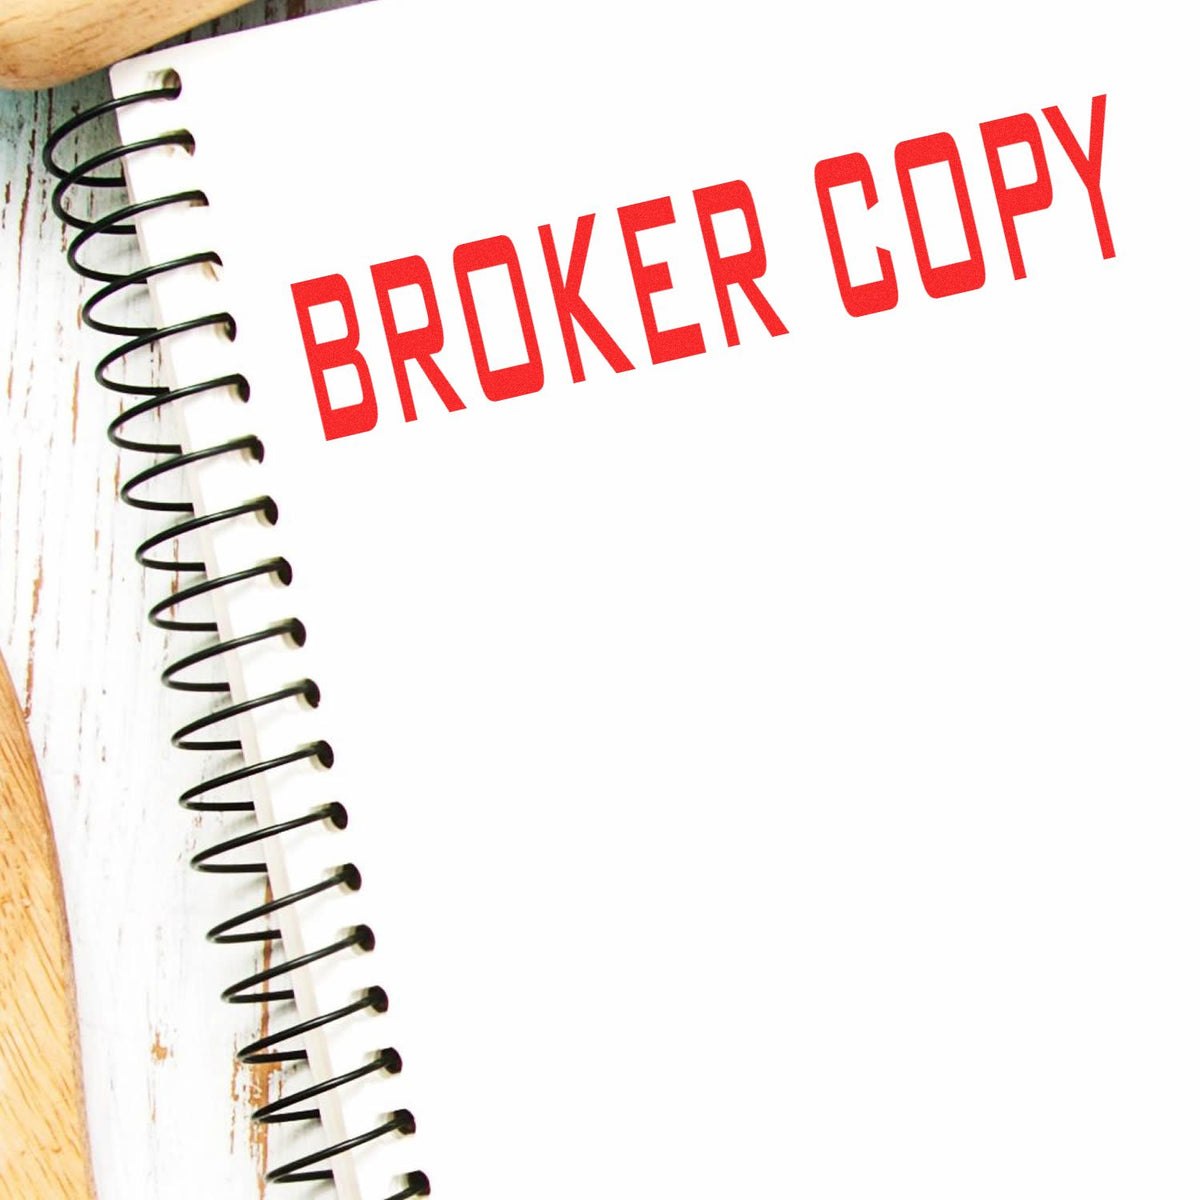 Large Pre-Inked Broker Copy Stamp In Use Photo